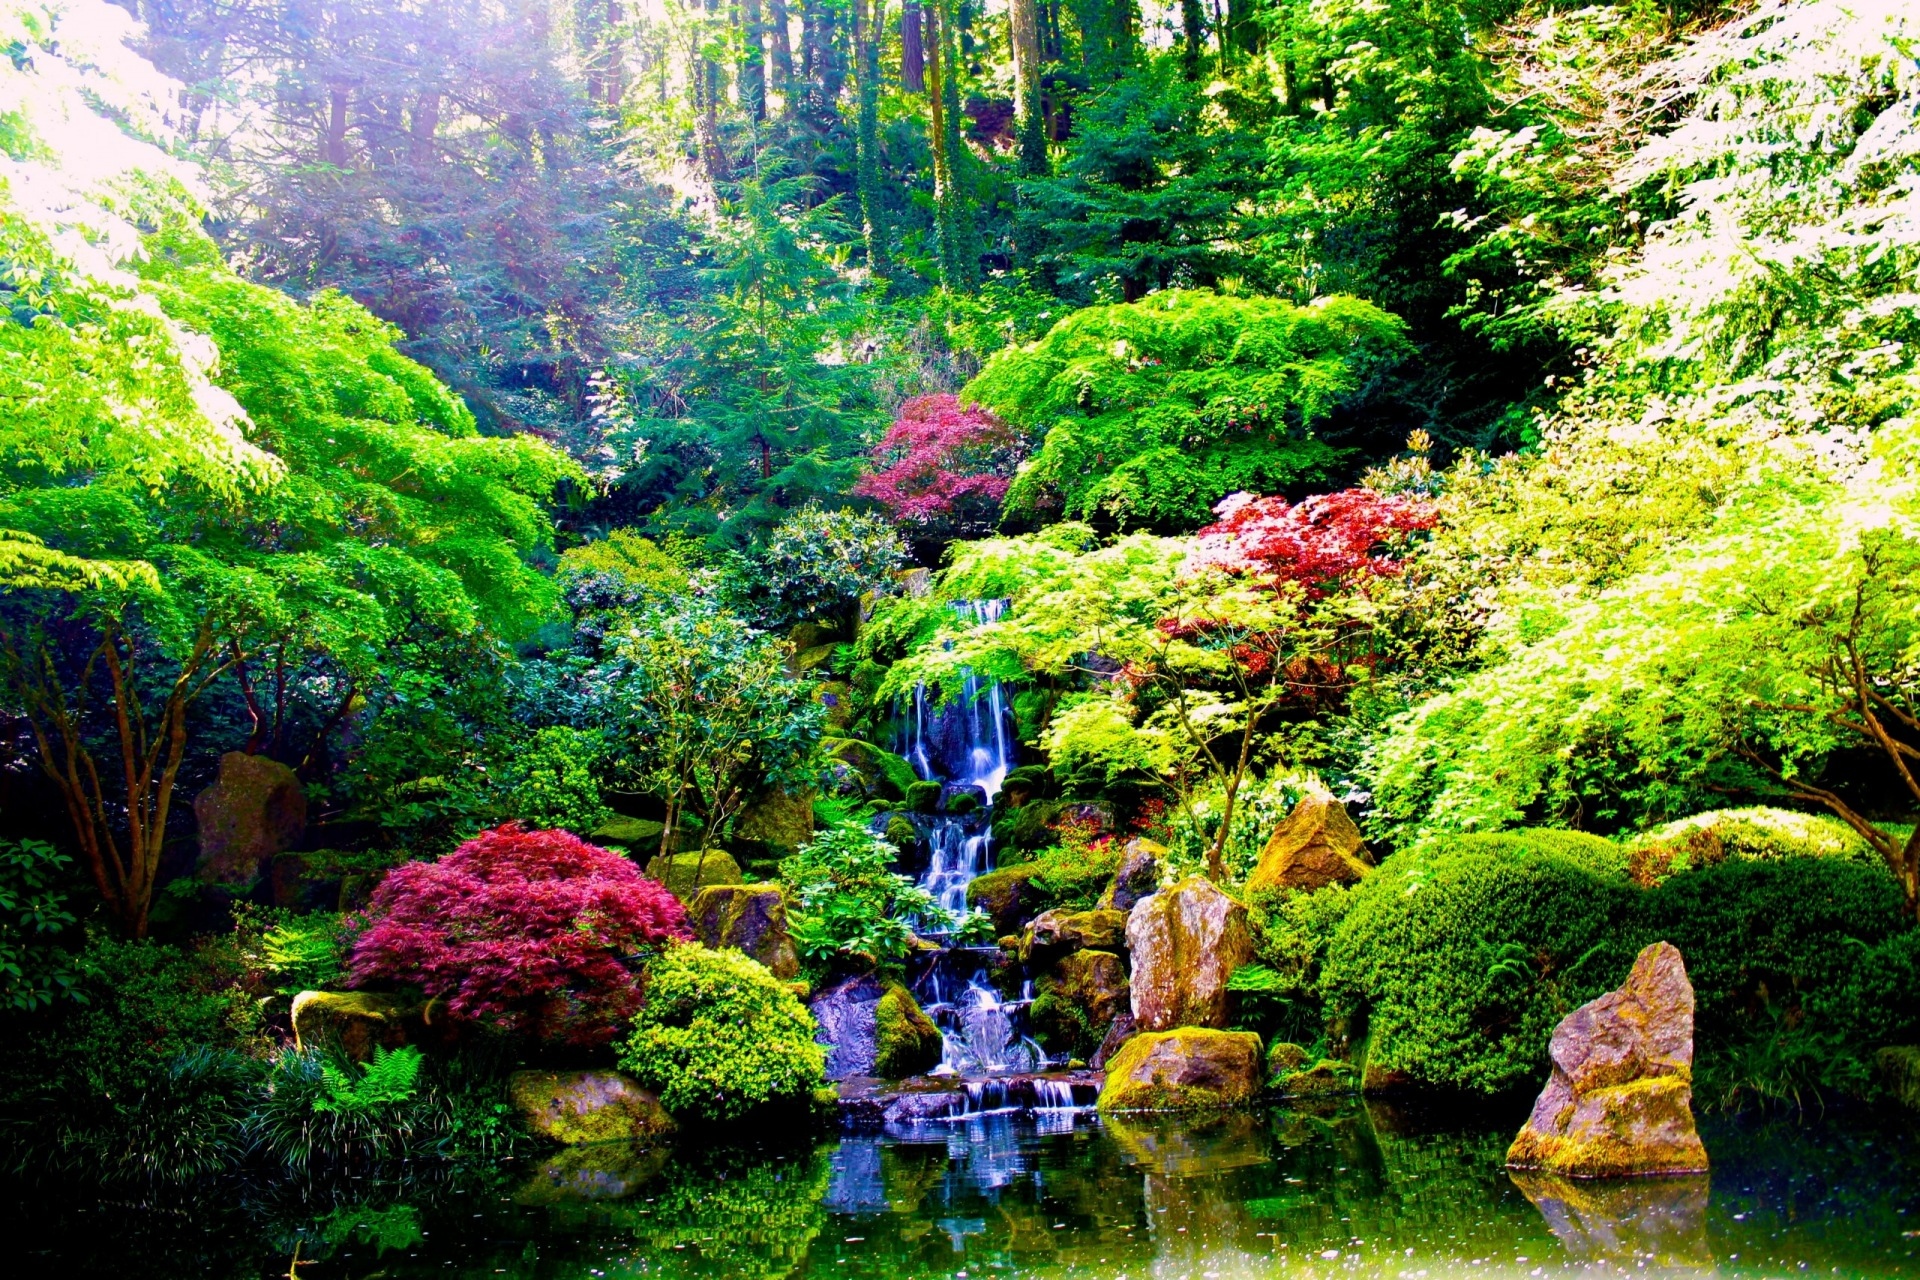 earth, waterfall, forest, garden, nature, plant, vegetation, water, waterfalls